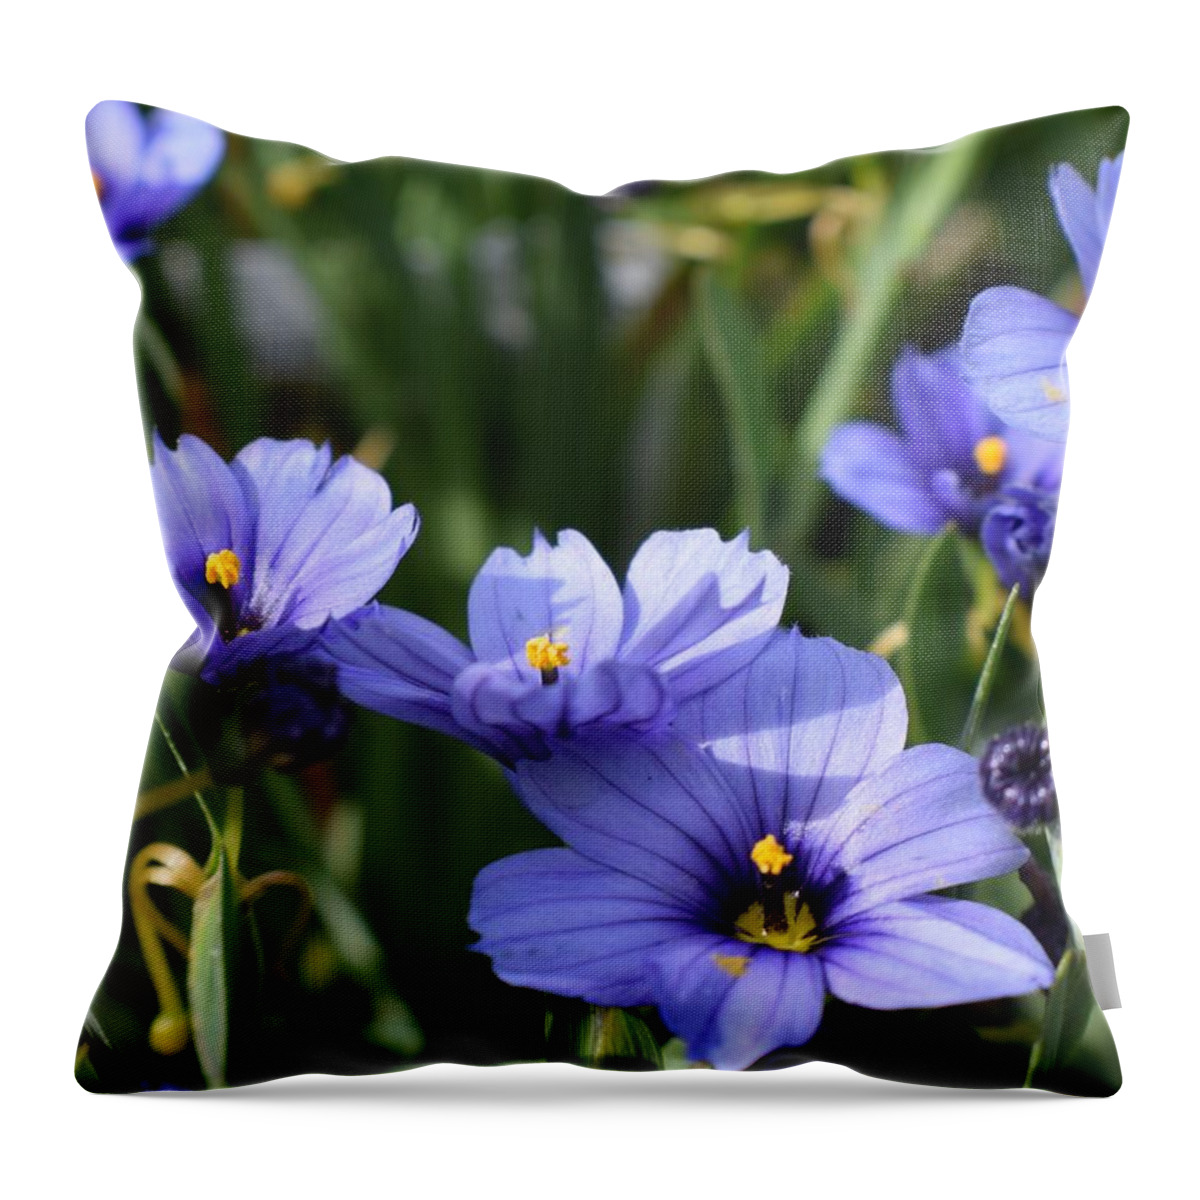 Grass Throw Pillow featuring the photograph Blue Eyed Grass by Jimmy Chuck Smith